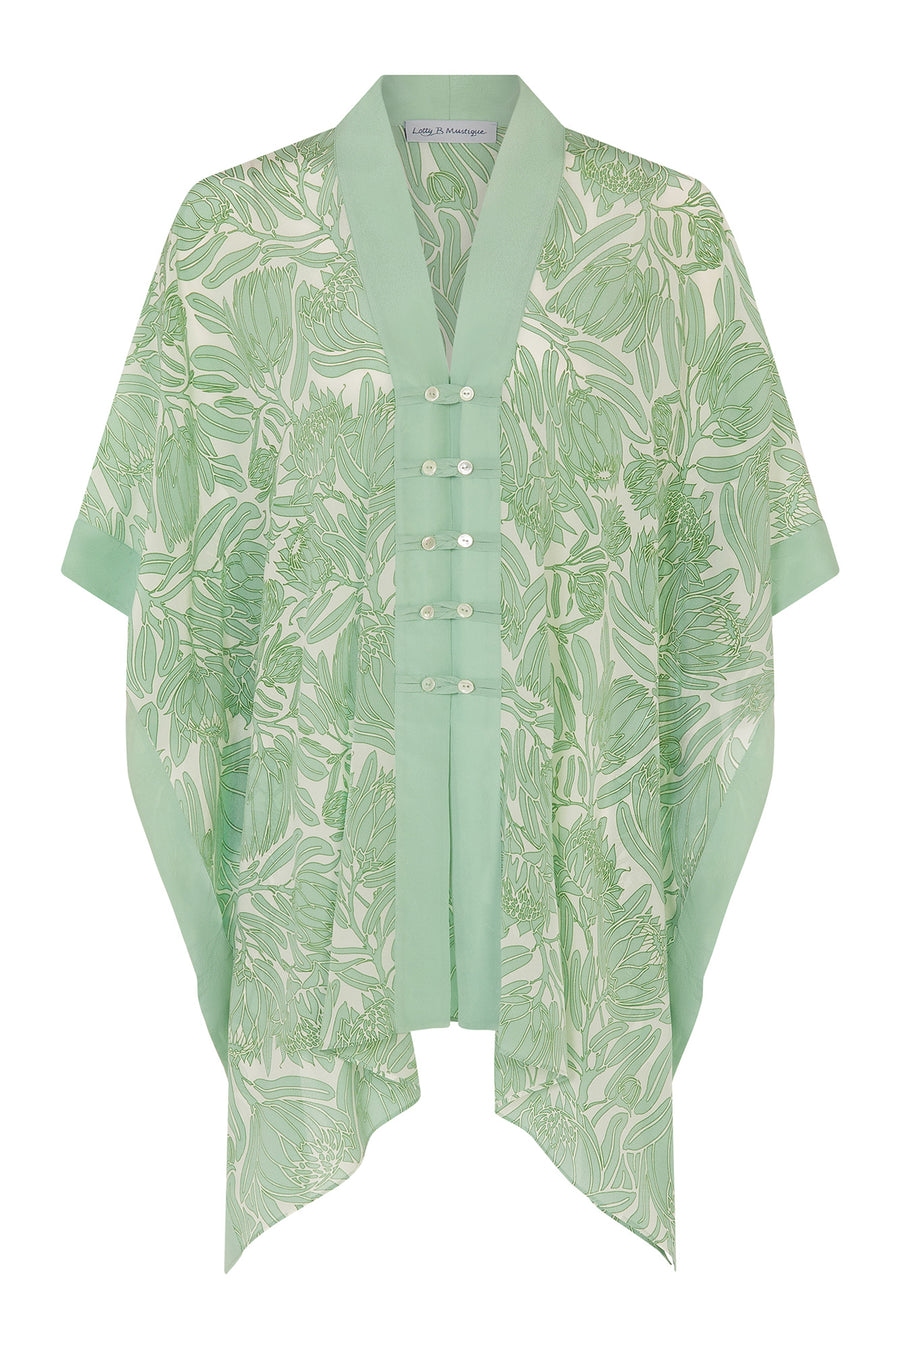 Chic vacation style buttoned poncho in floral green Protea print by Lotty B Mustique